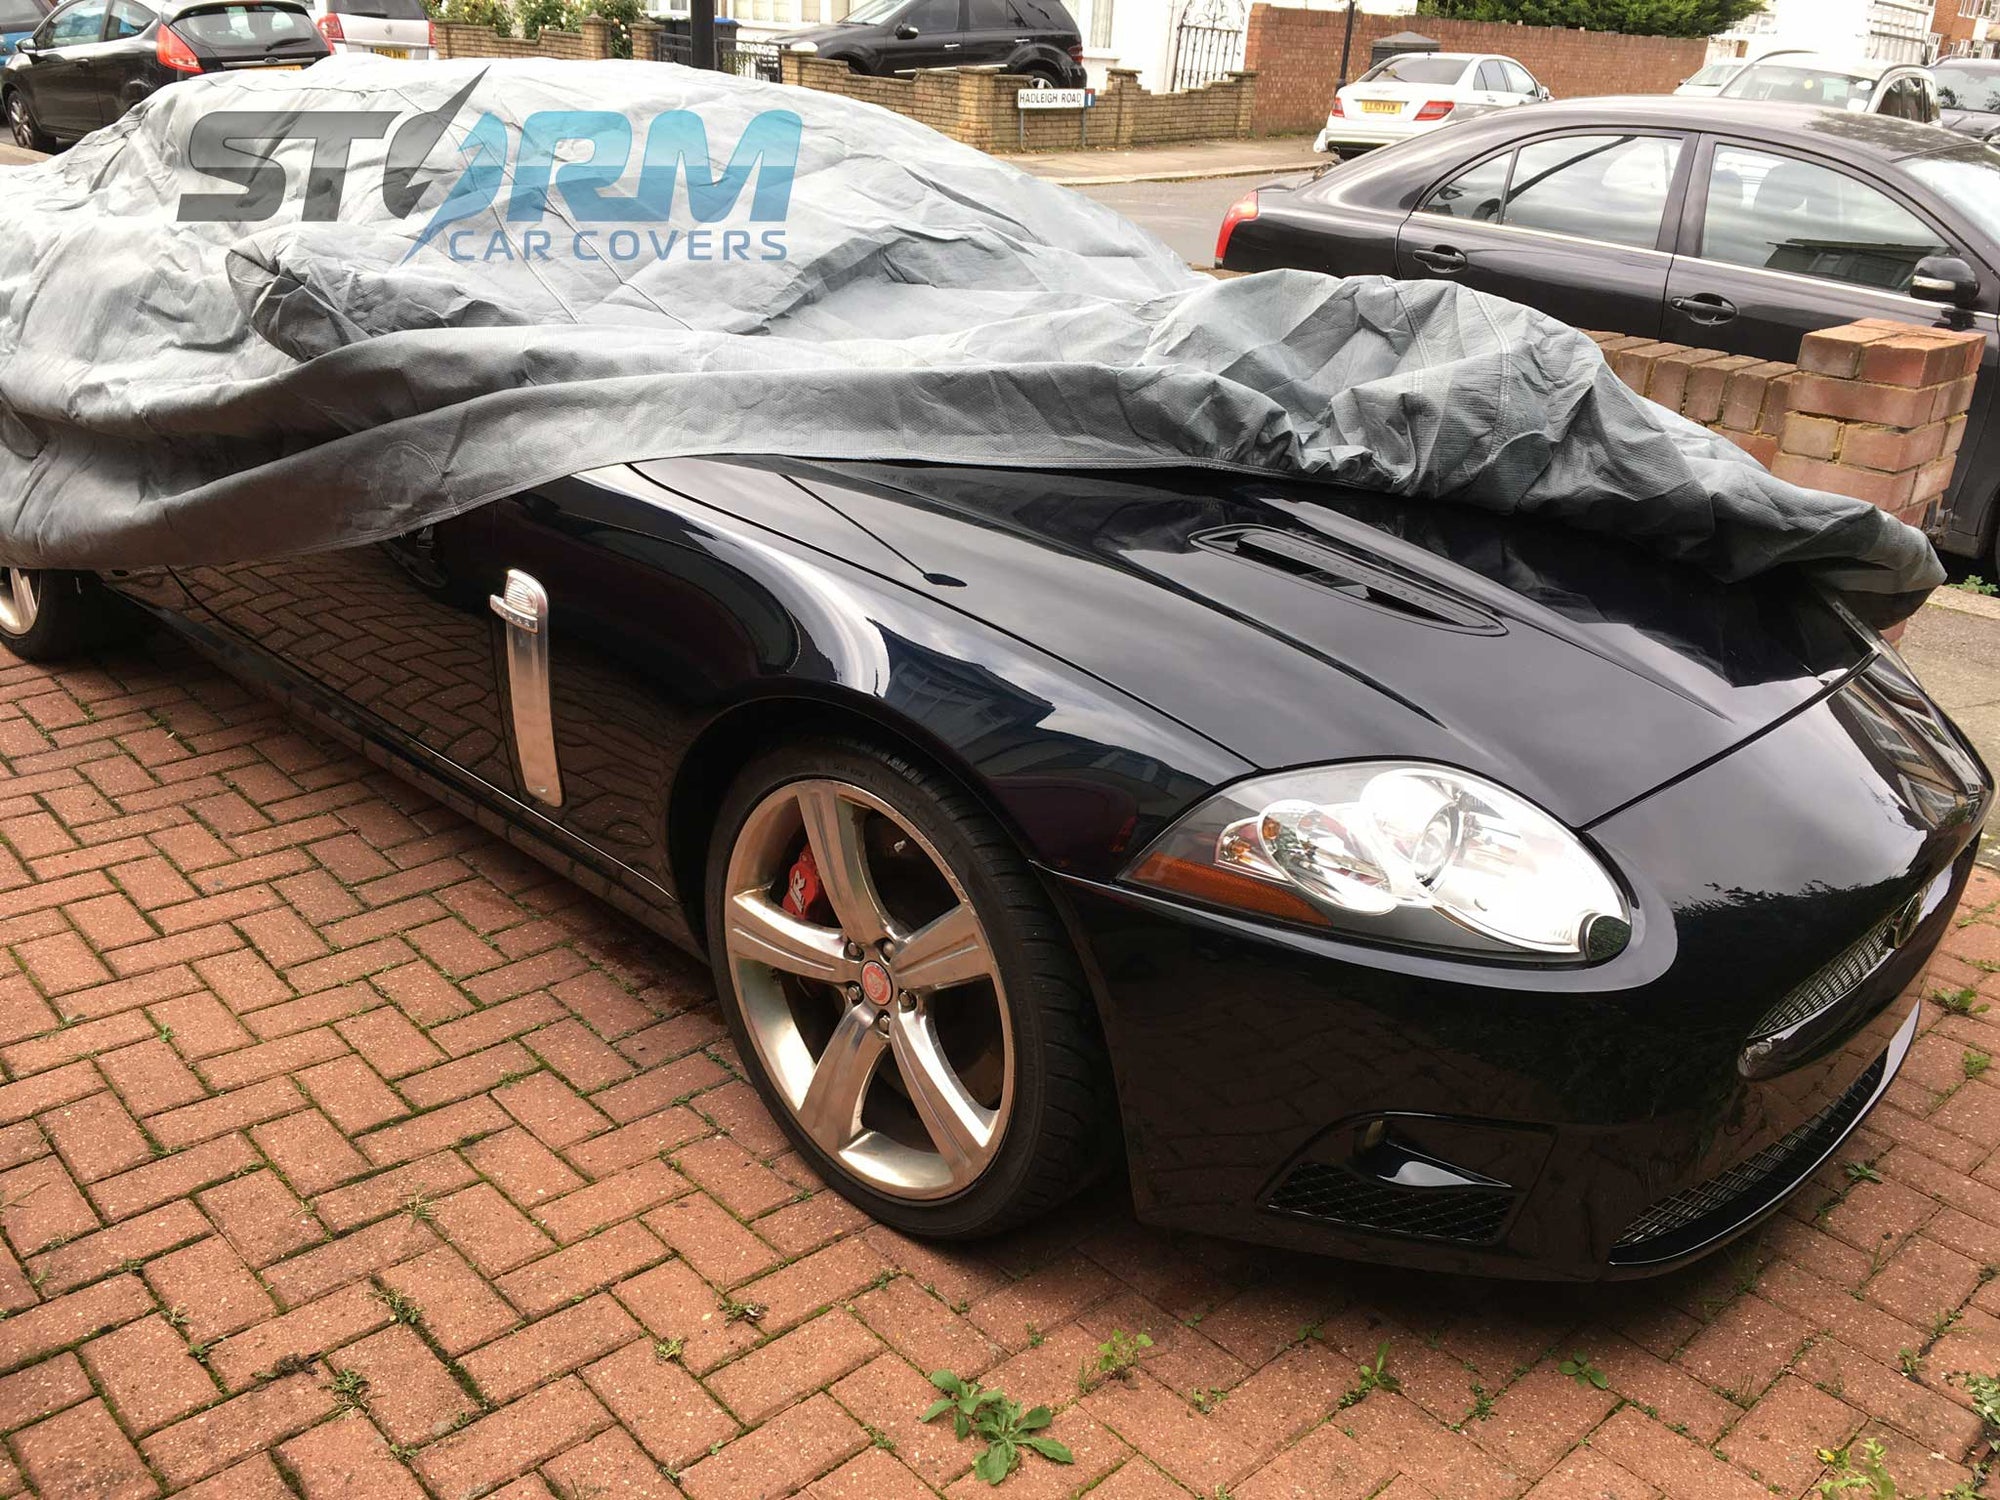 Stormforce outdoor breathable car covers for JAGUAR - Storm Car Covers